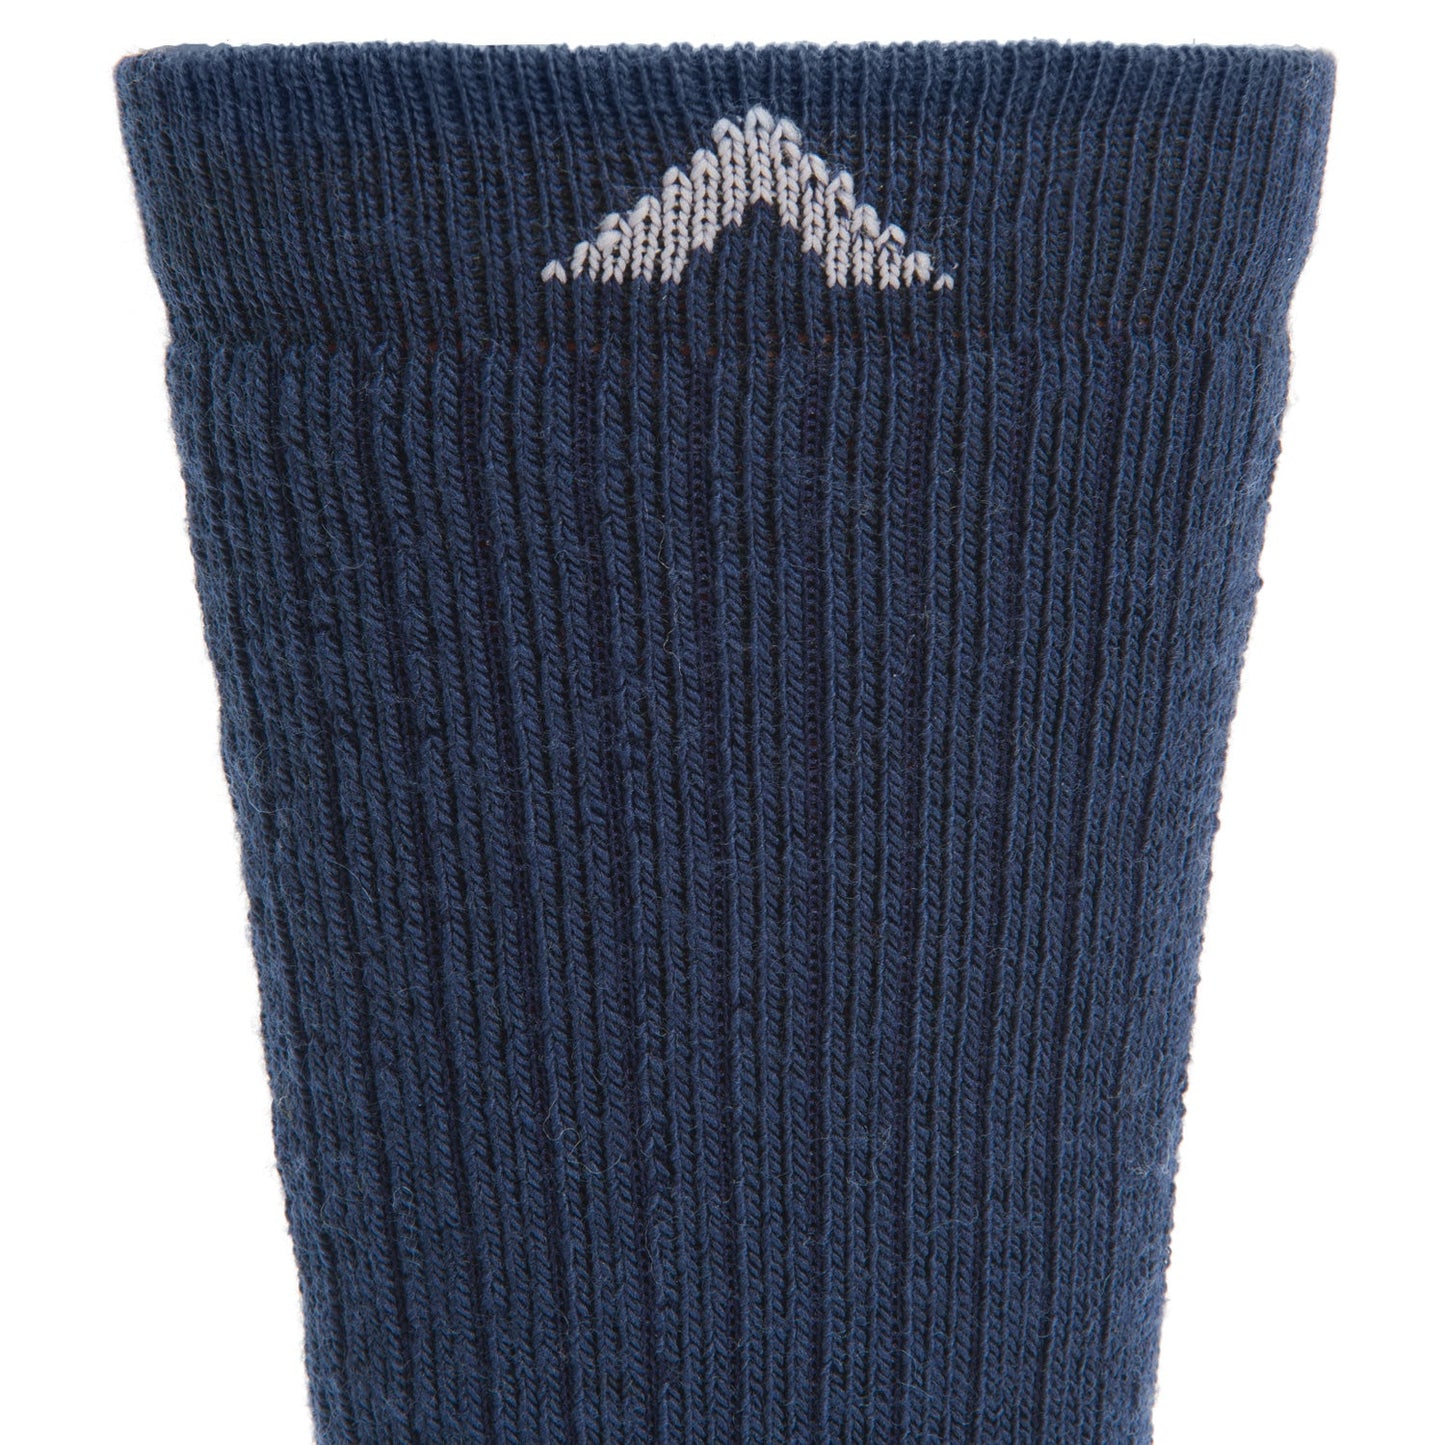 Navy I cuff perspective